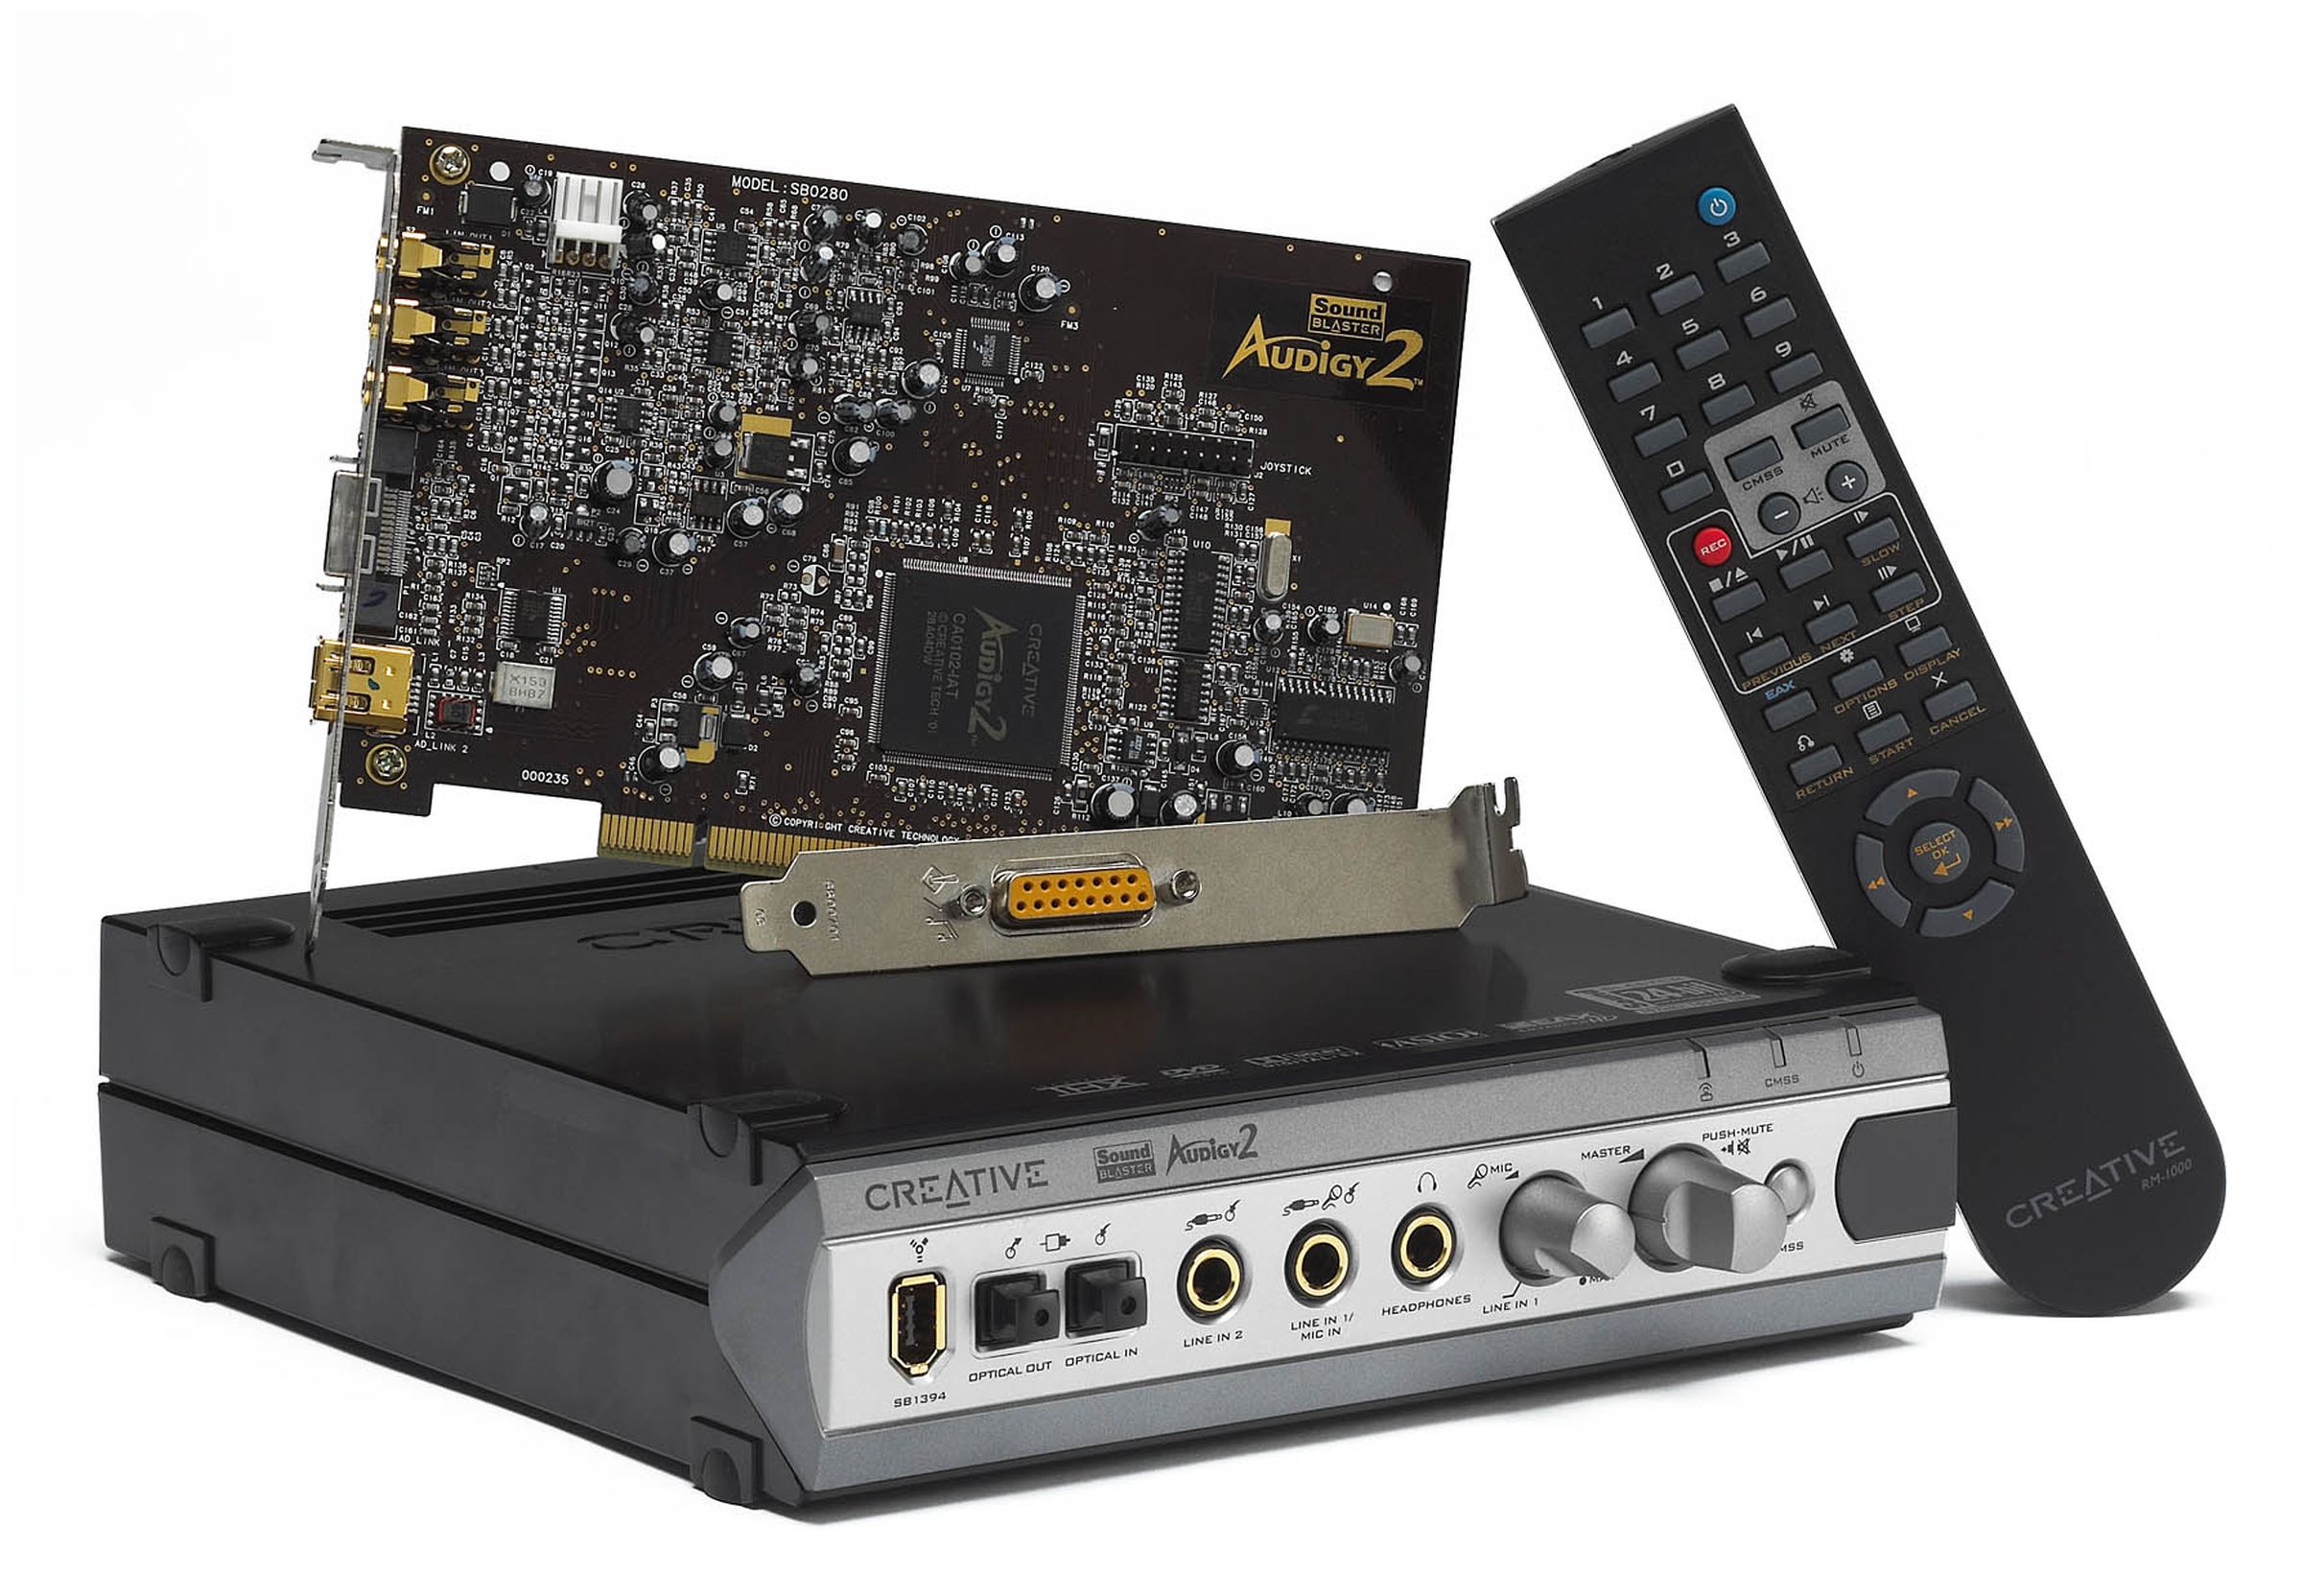 Photo of the Audigy 2 ZS Platinum Pro sound card with its outer box and remote control.